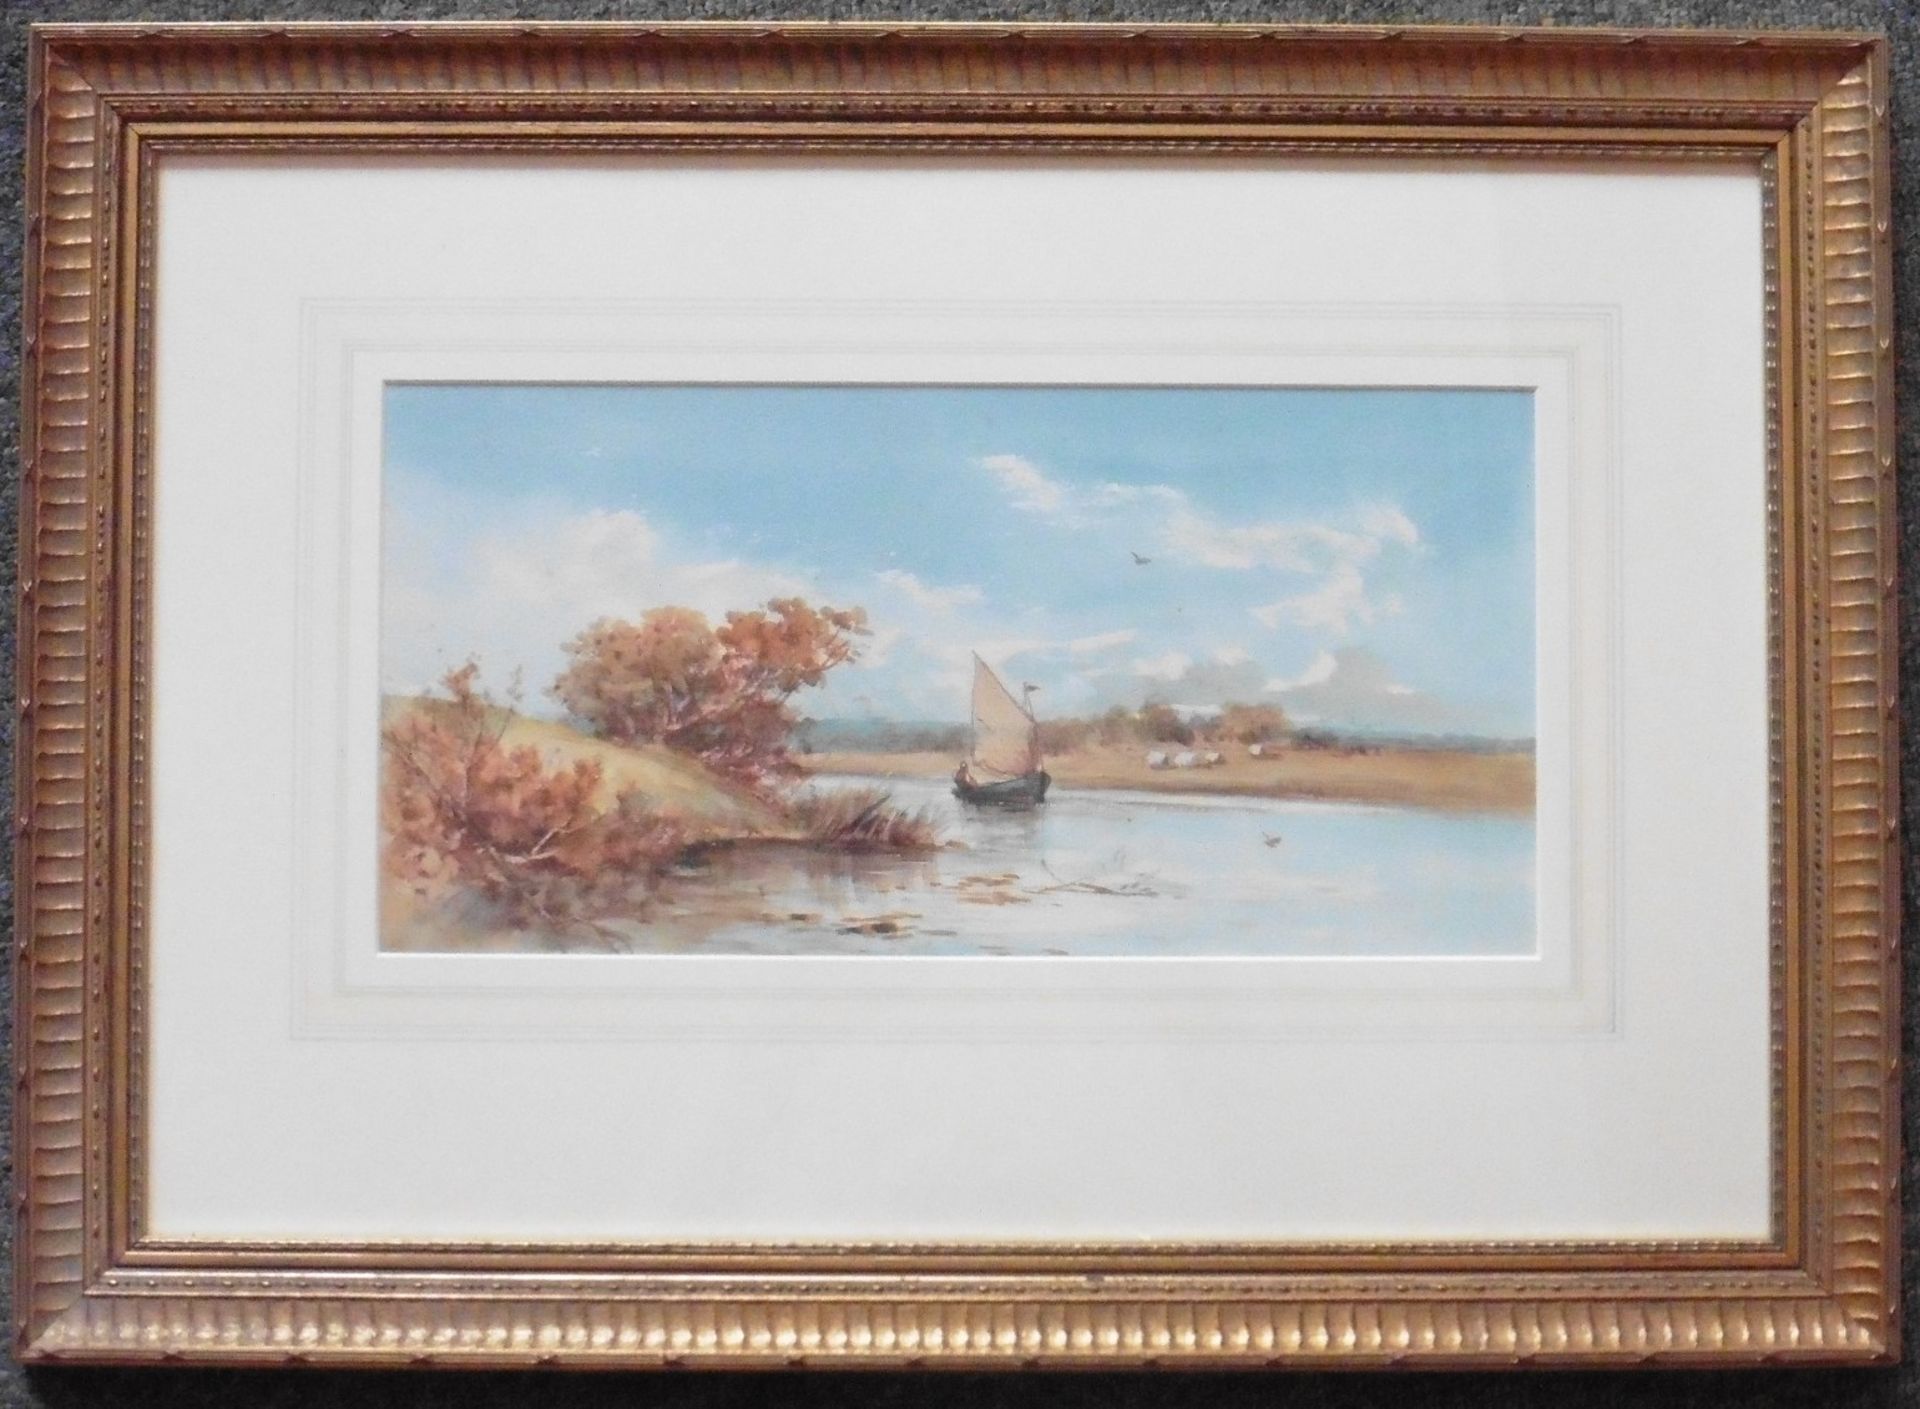 Unsigned 19c watercolour “On the estuary” Possibly Norfolk - Image 2 of 3